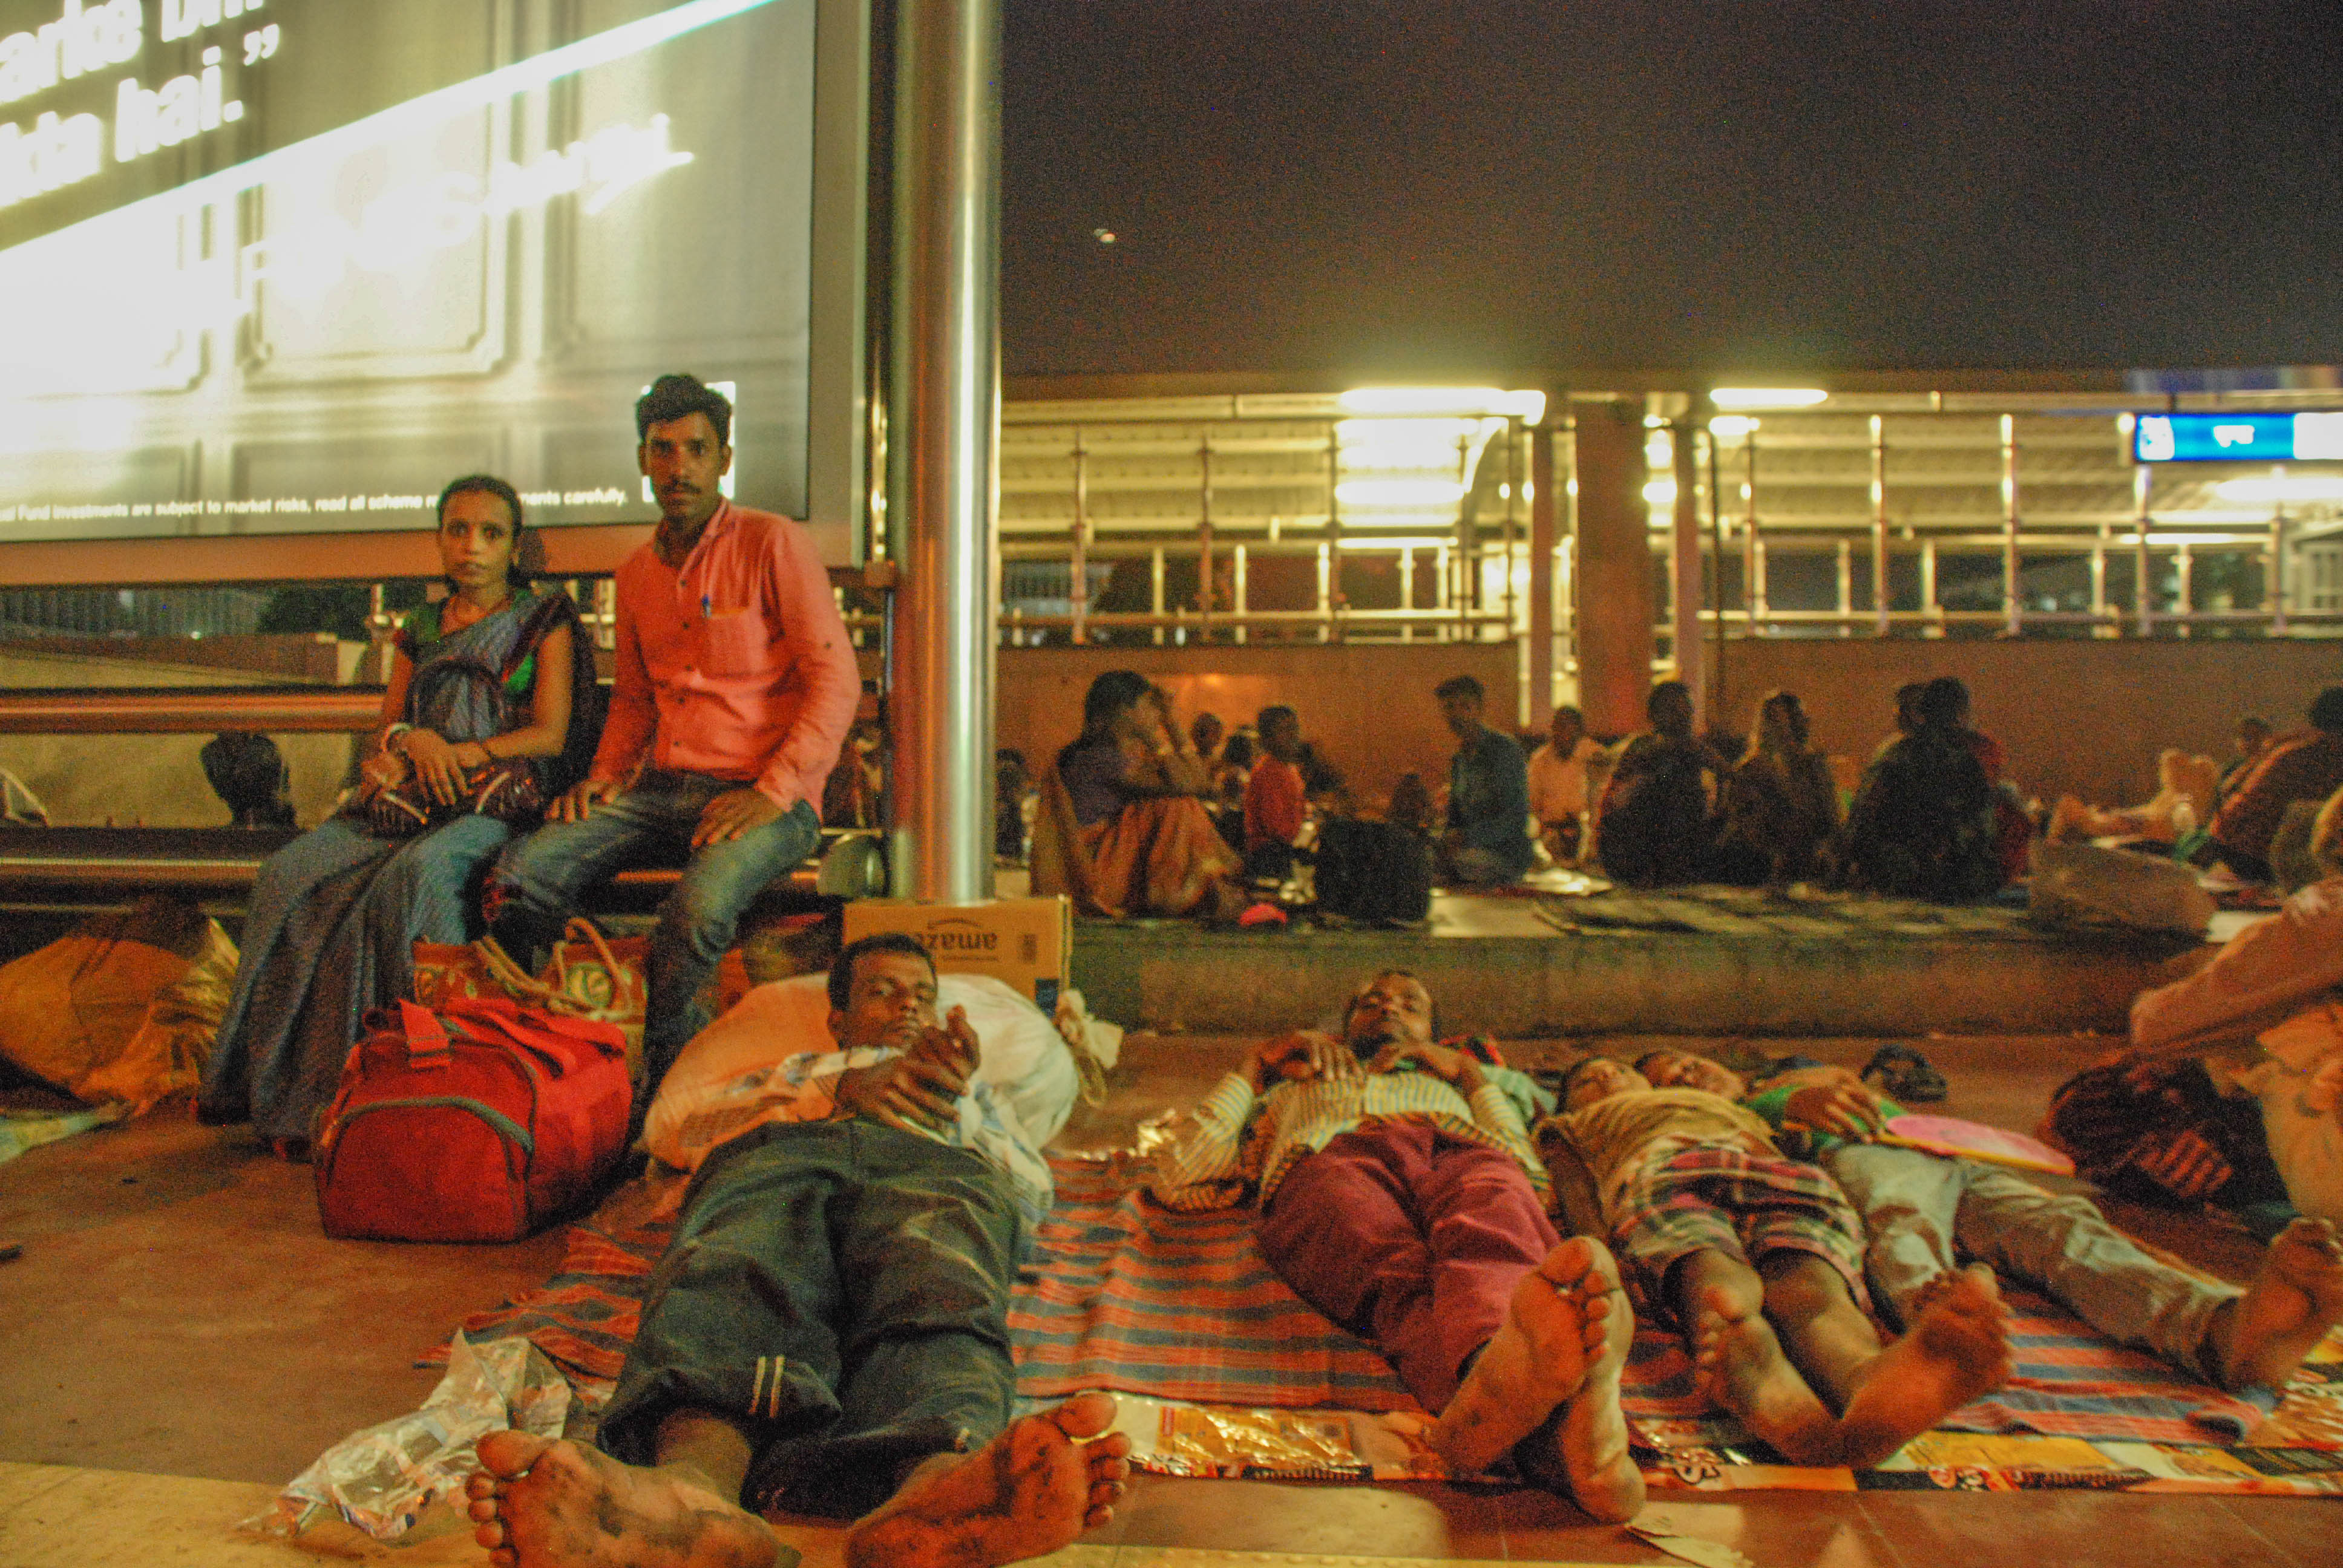 Ultimately after day full of miseries they find peace and fall asleep on Bus stand and metro station.